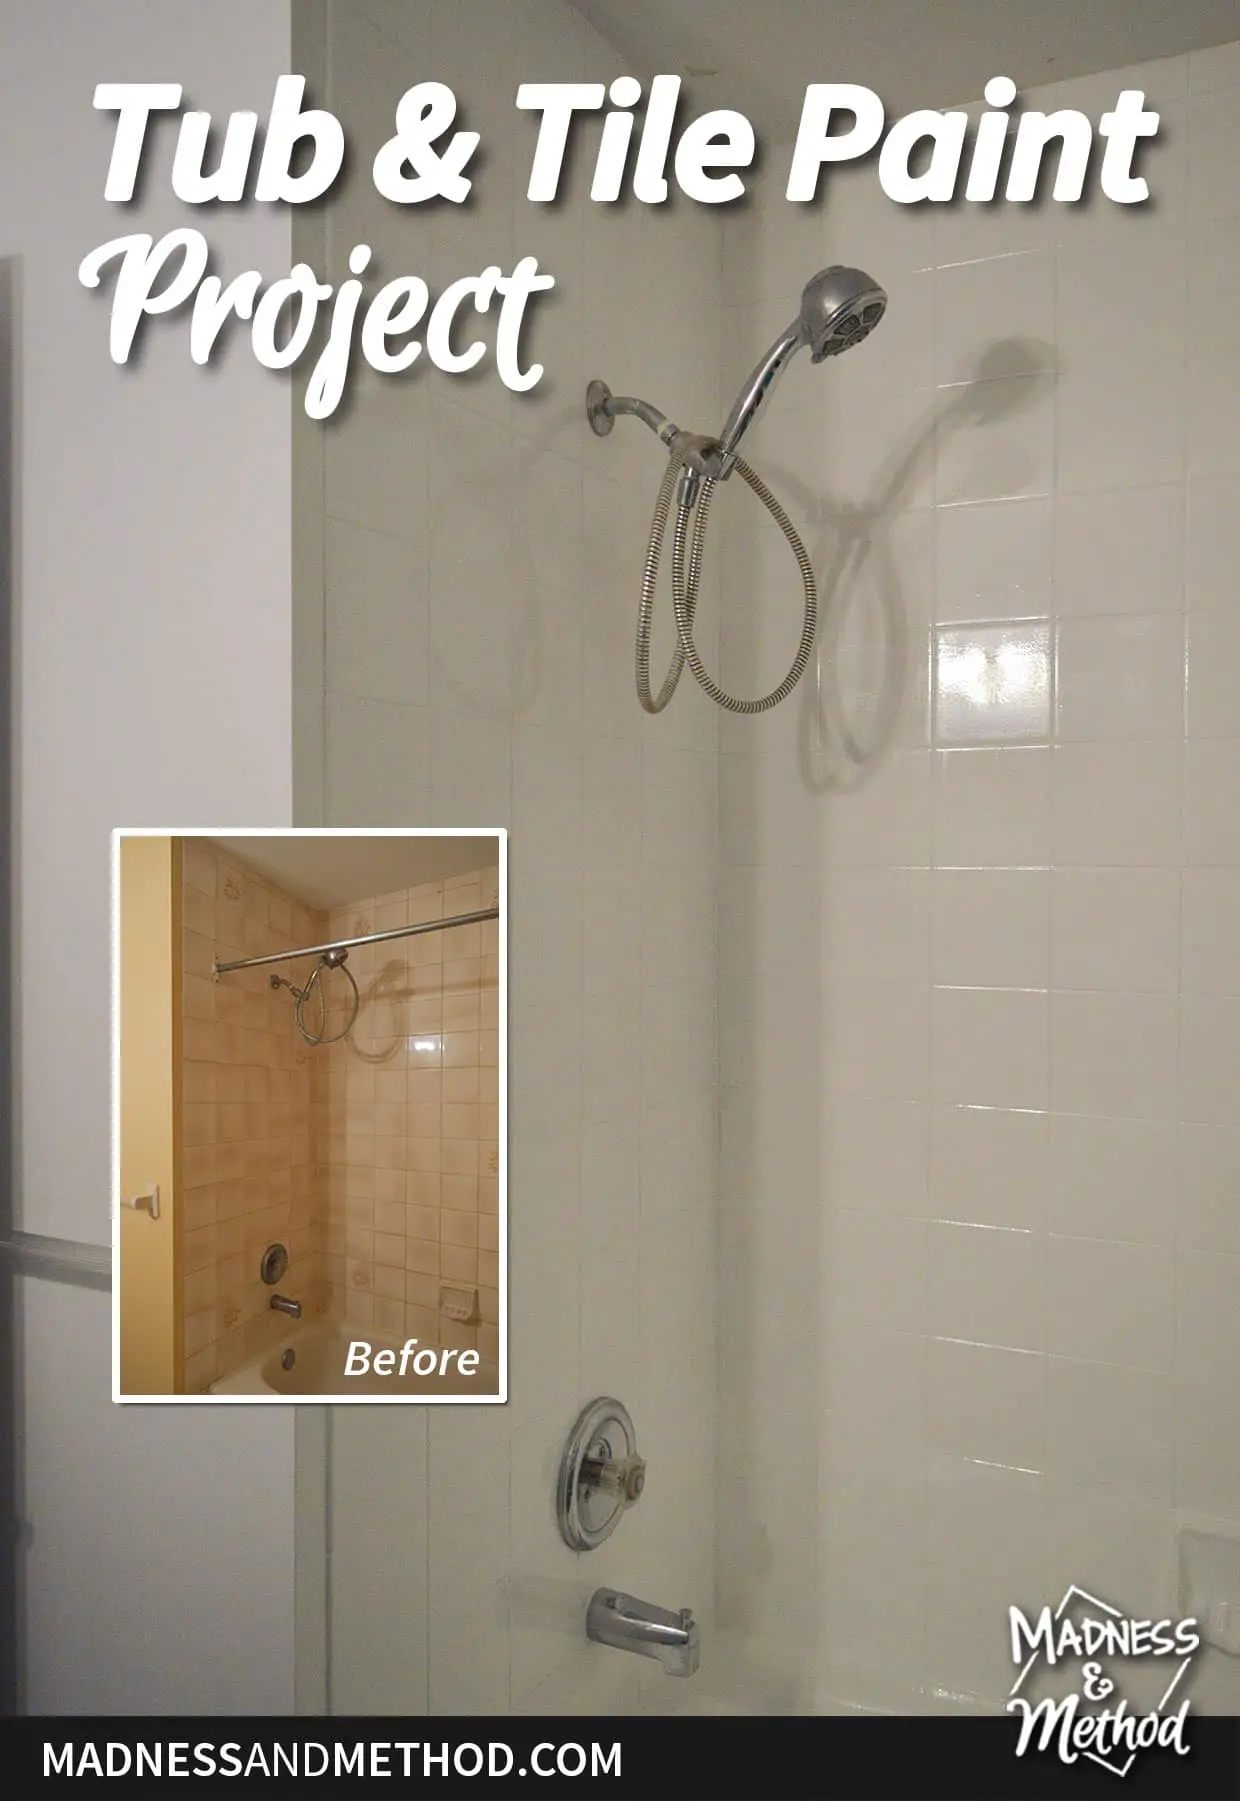 tub and tile paint project before after